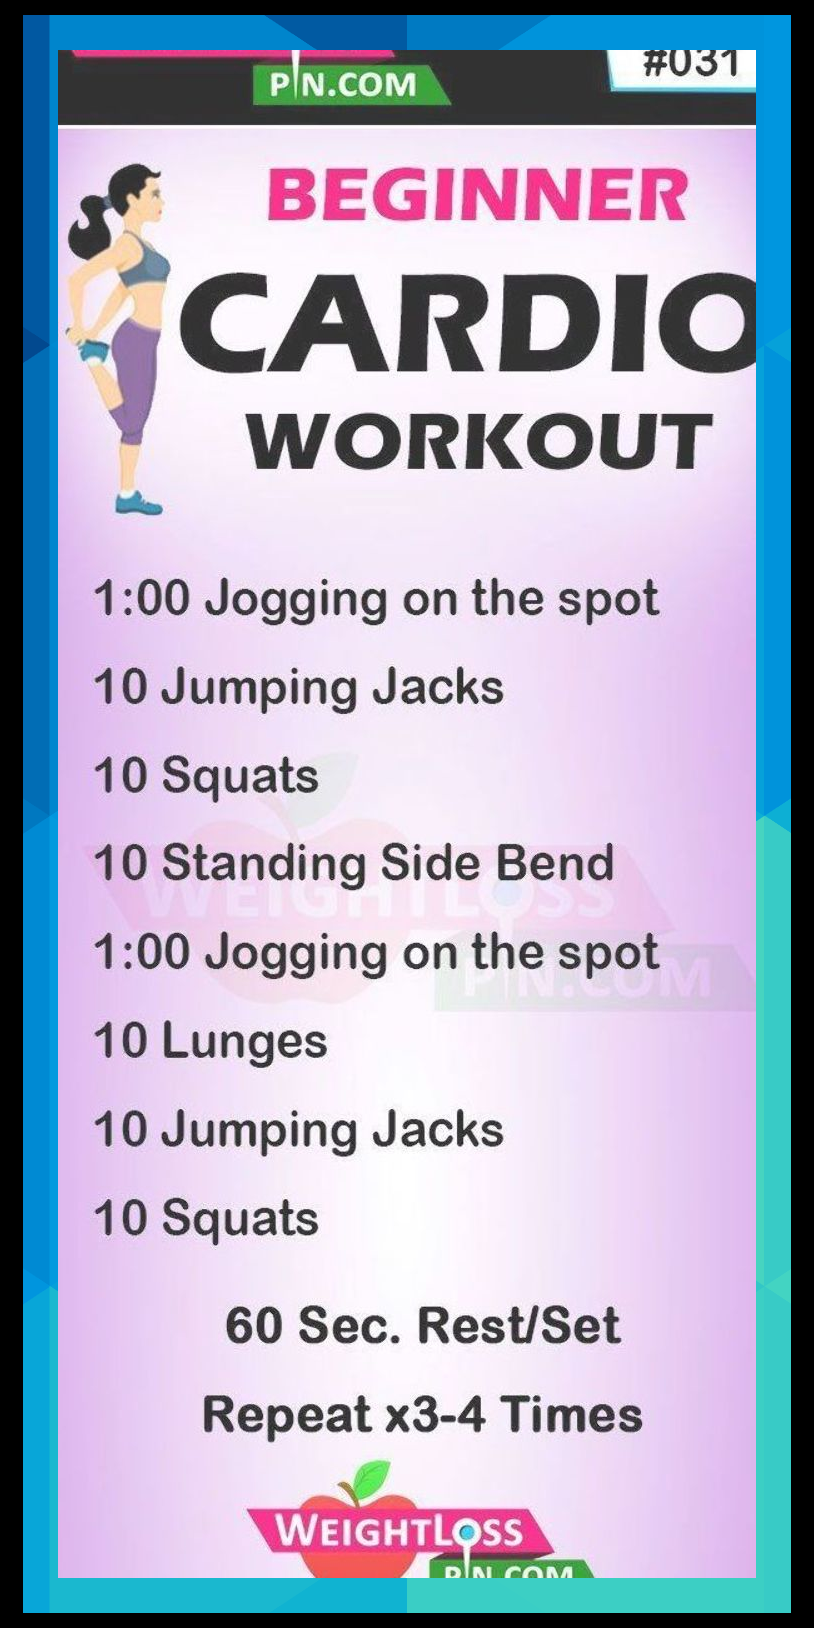 cardio workout at home for beginners -   18 workouts at home for beginners ideas